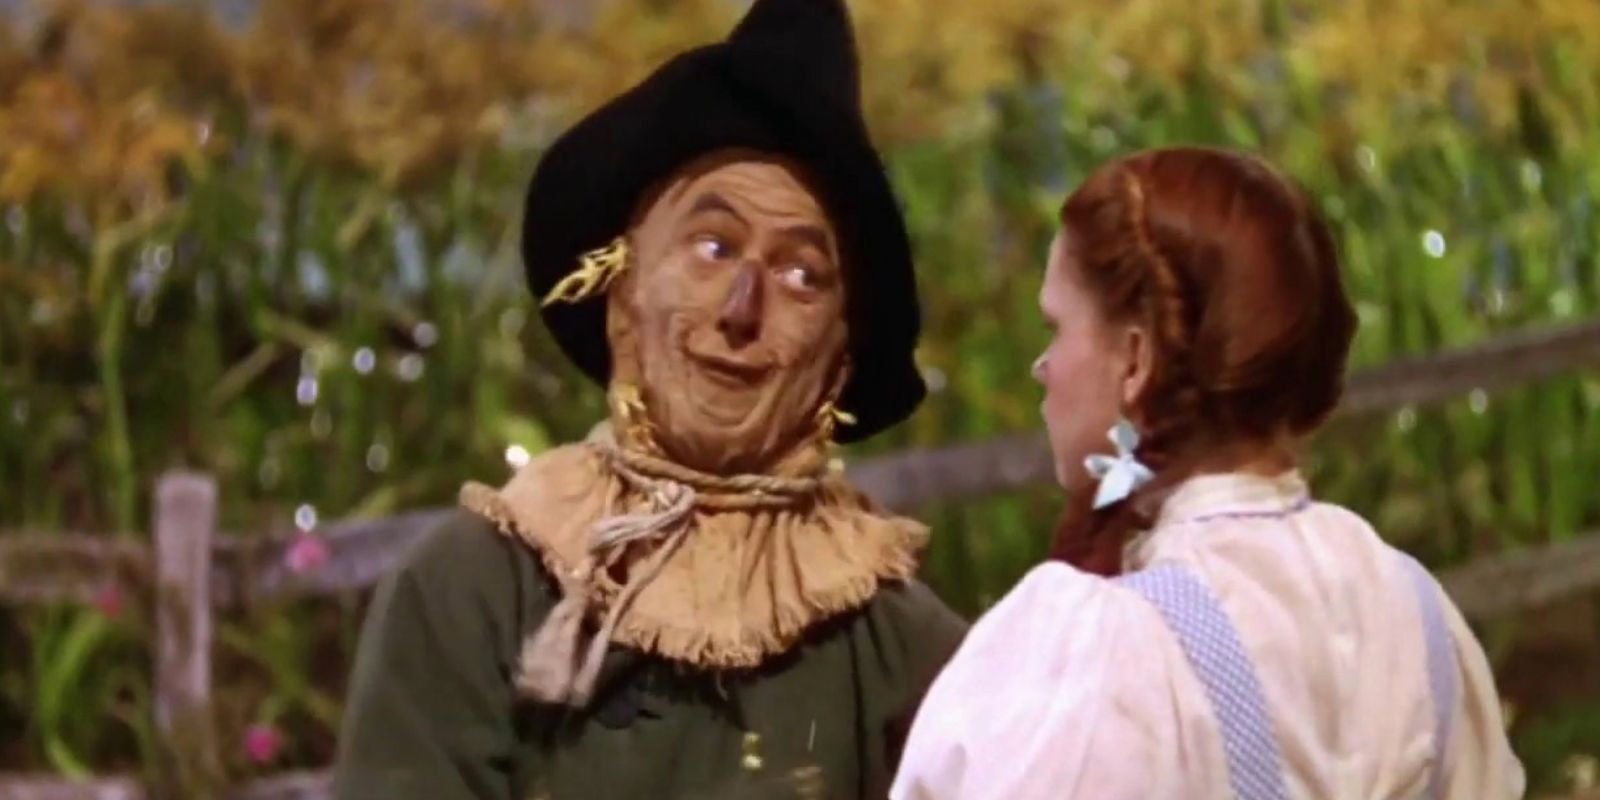 The Scarecrow and Dorothy In The Wizard Of Oz